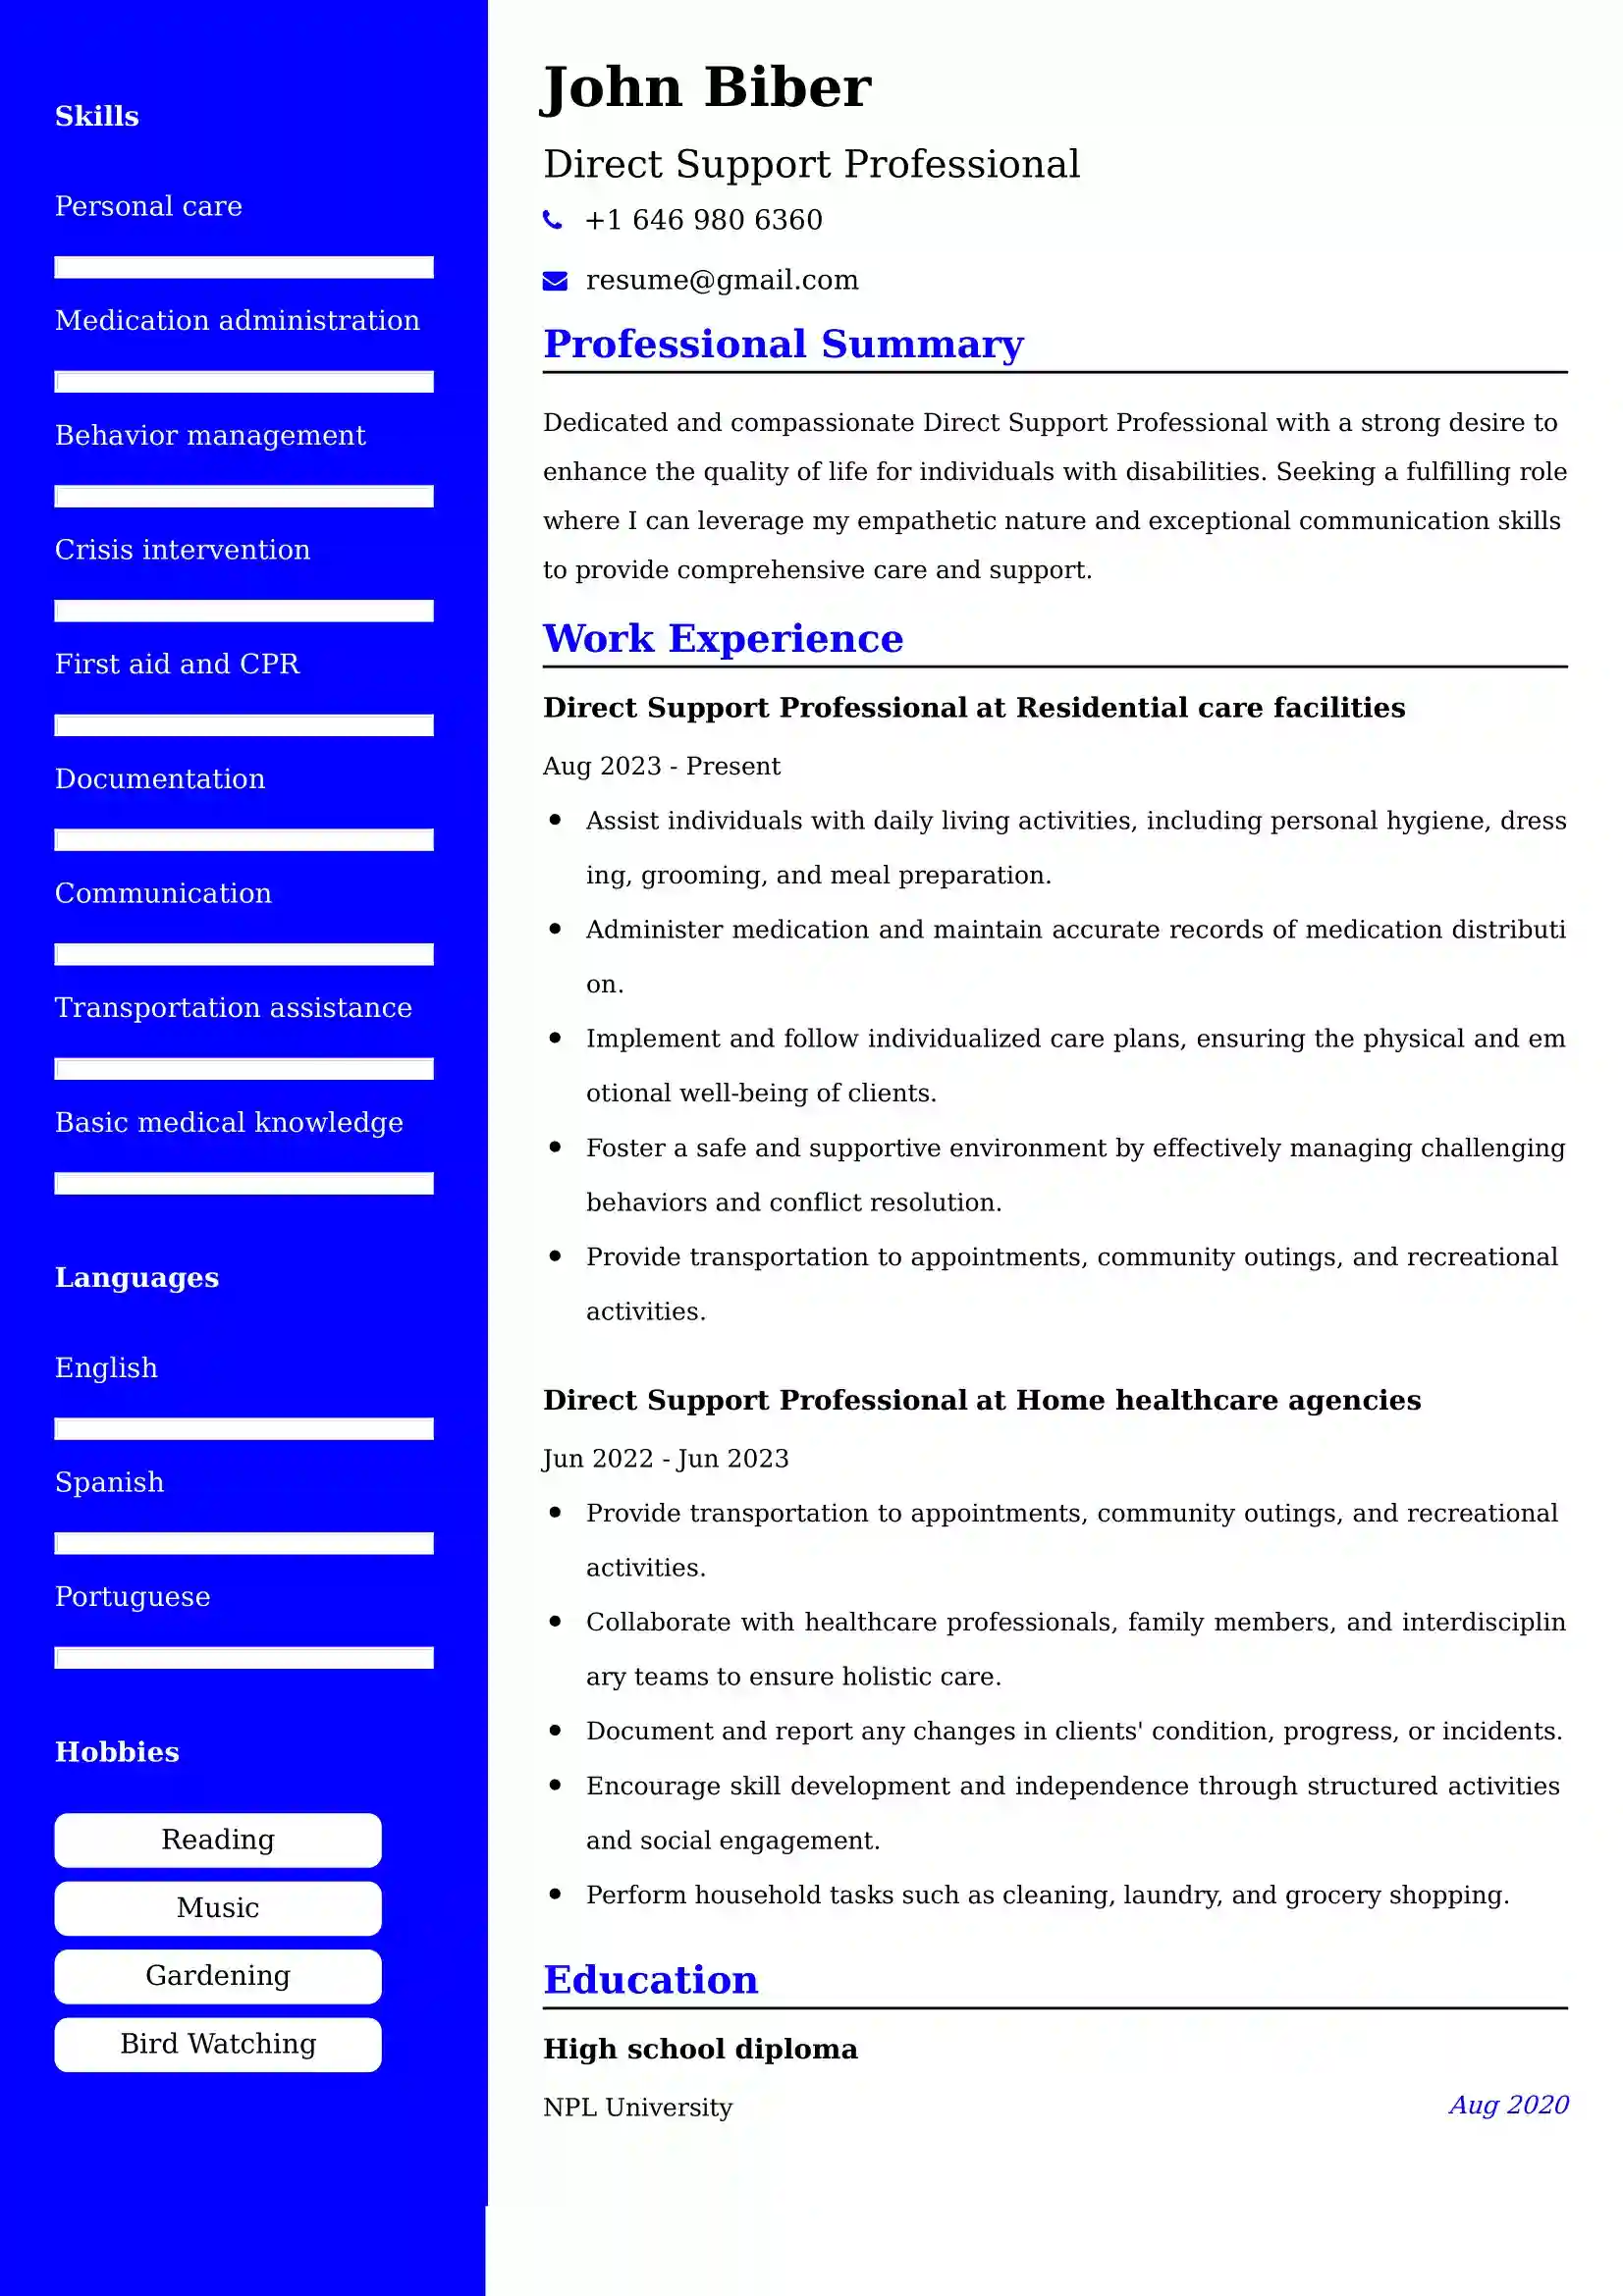 Direct Support Professional Resume Examples for UAE